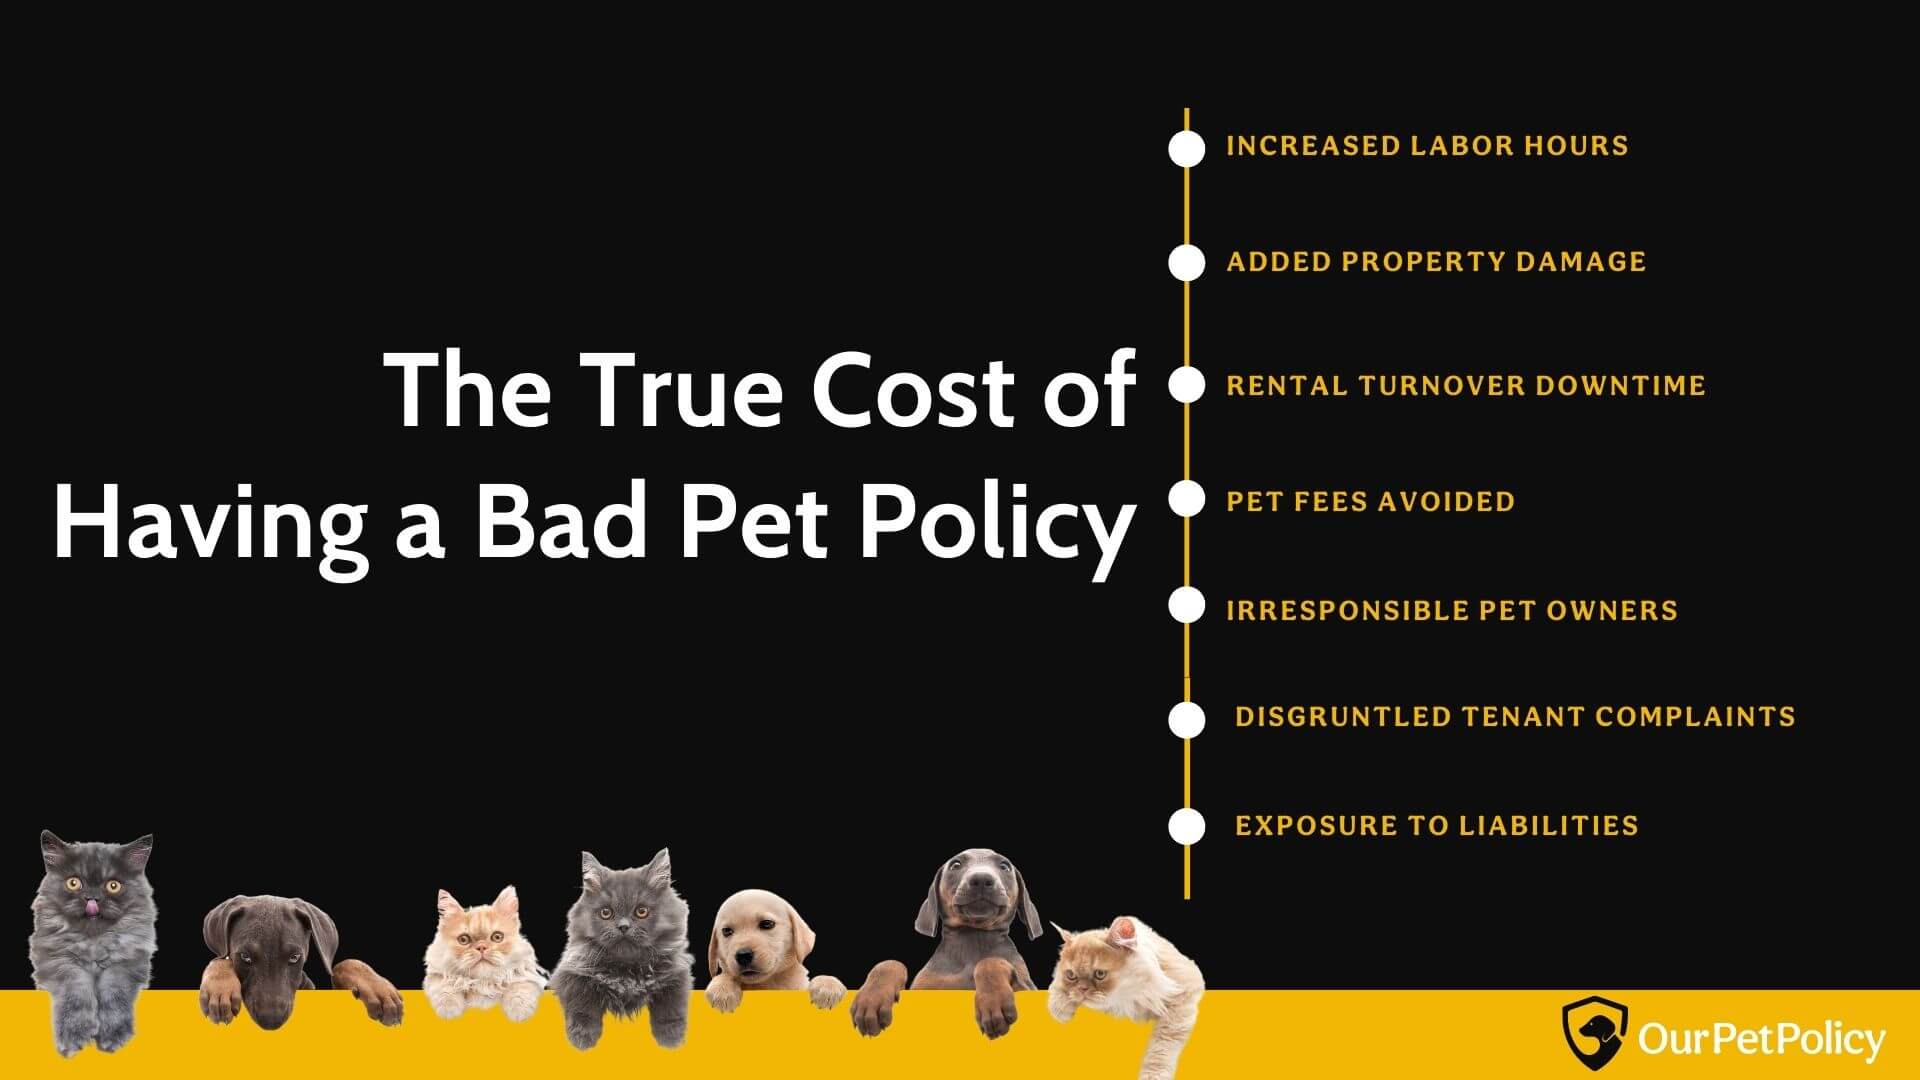 The true cost of having a bad pet policy